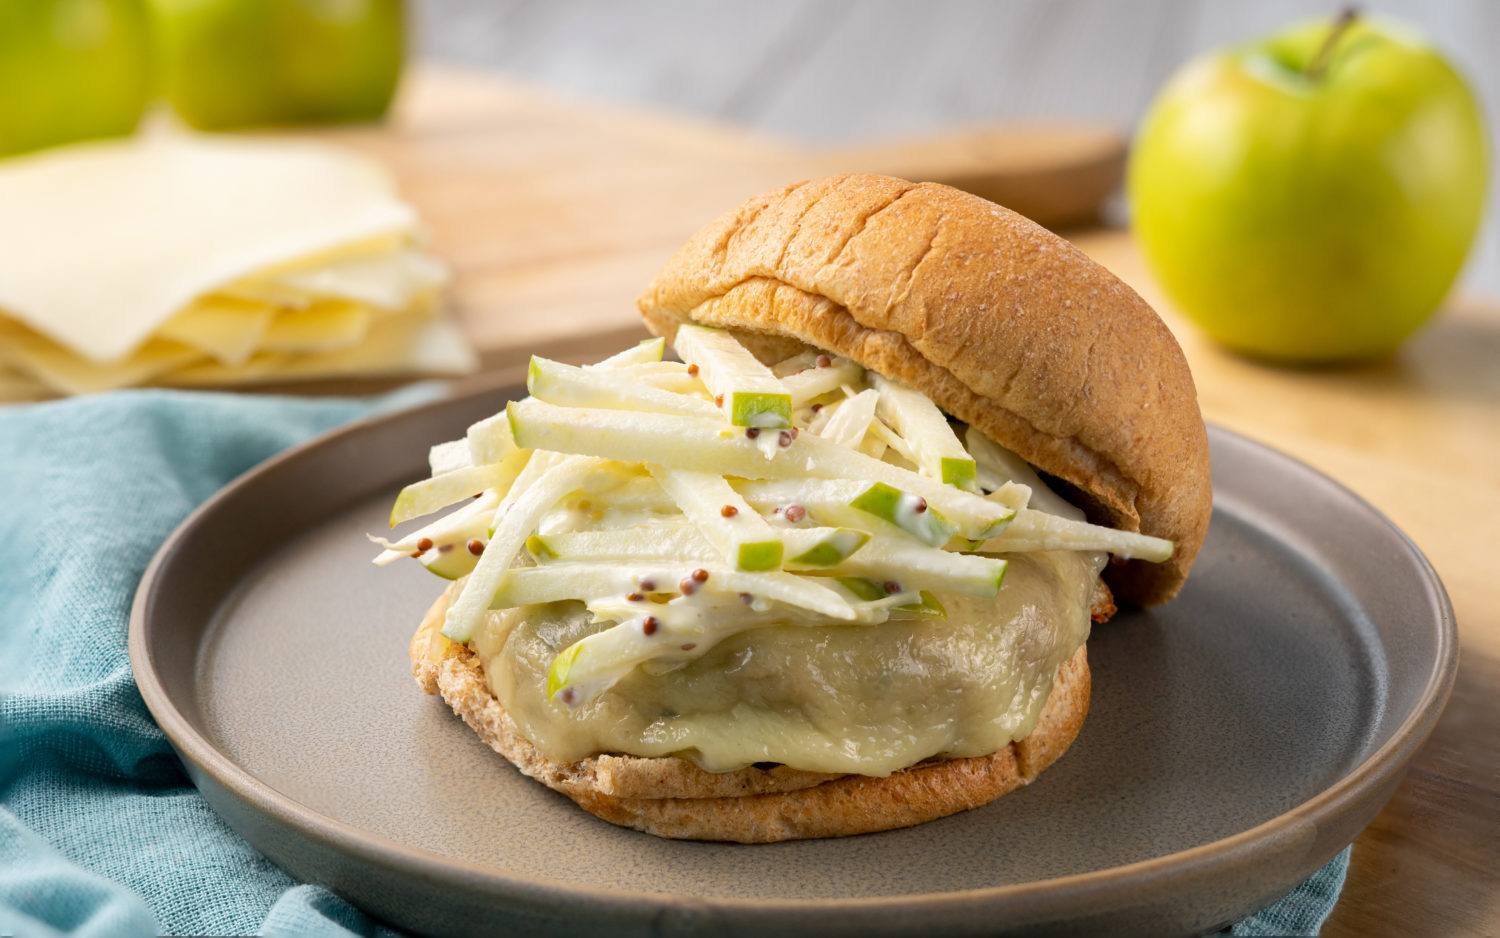 turkey cheddar burger with apple slaw is pictured